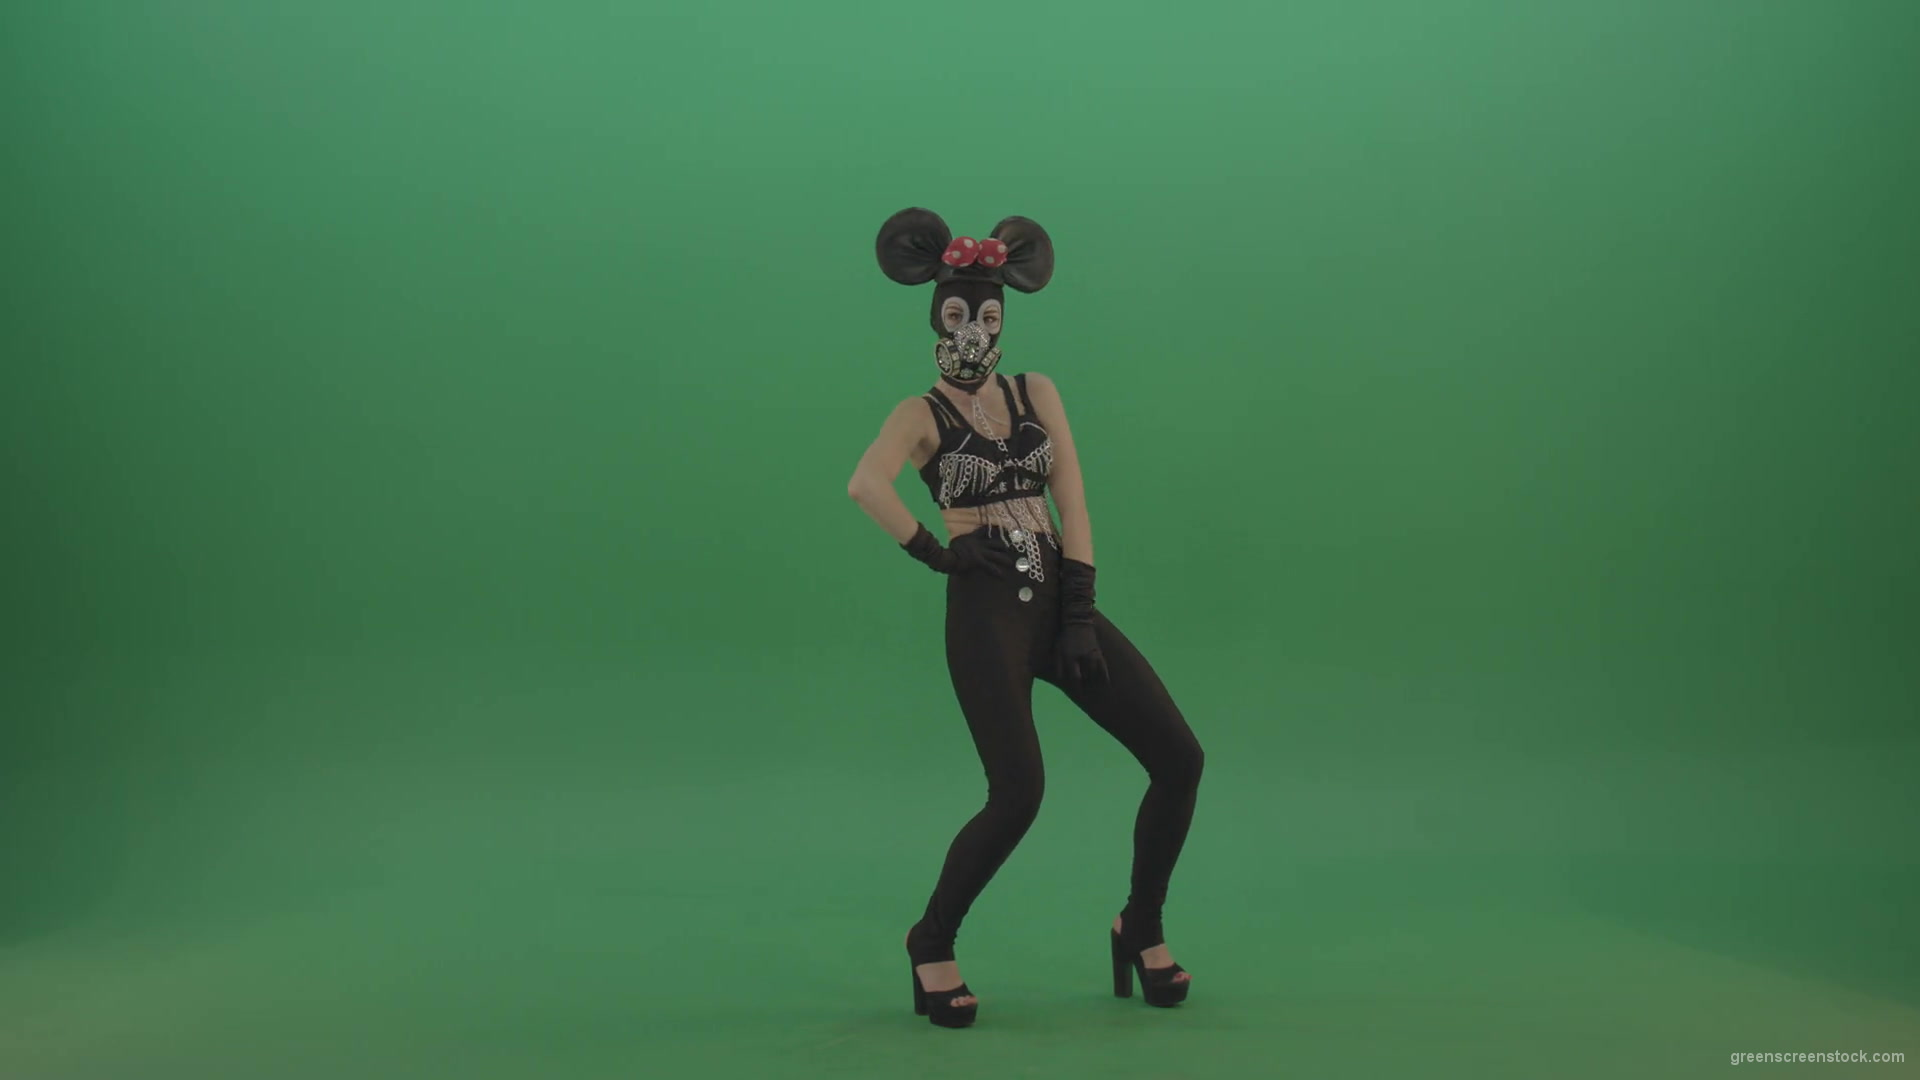 Sexy-dancing-mouse-girl-slowly-dance-in-mask-on-green-screen-1920_005 Green Screen Stock